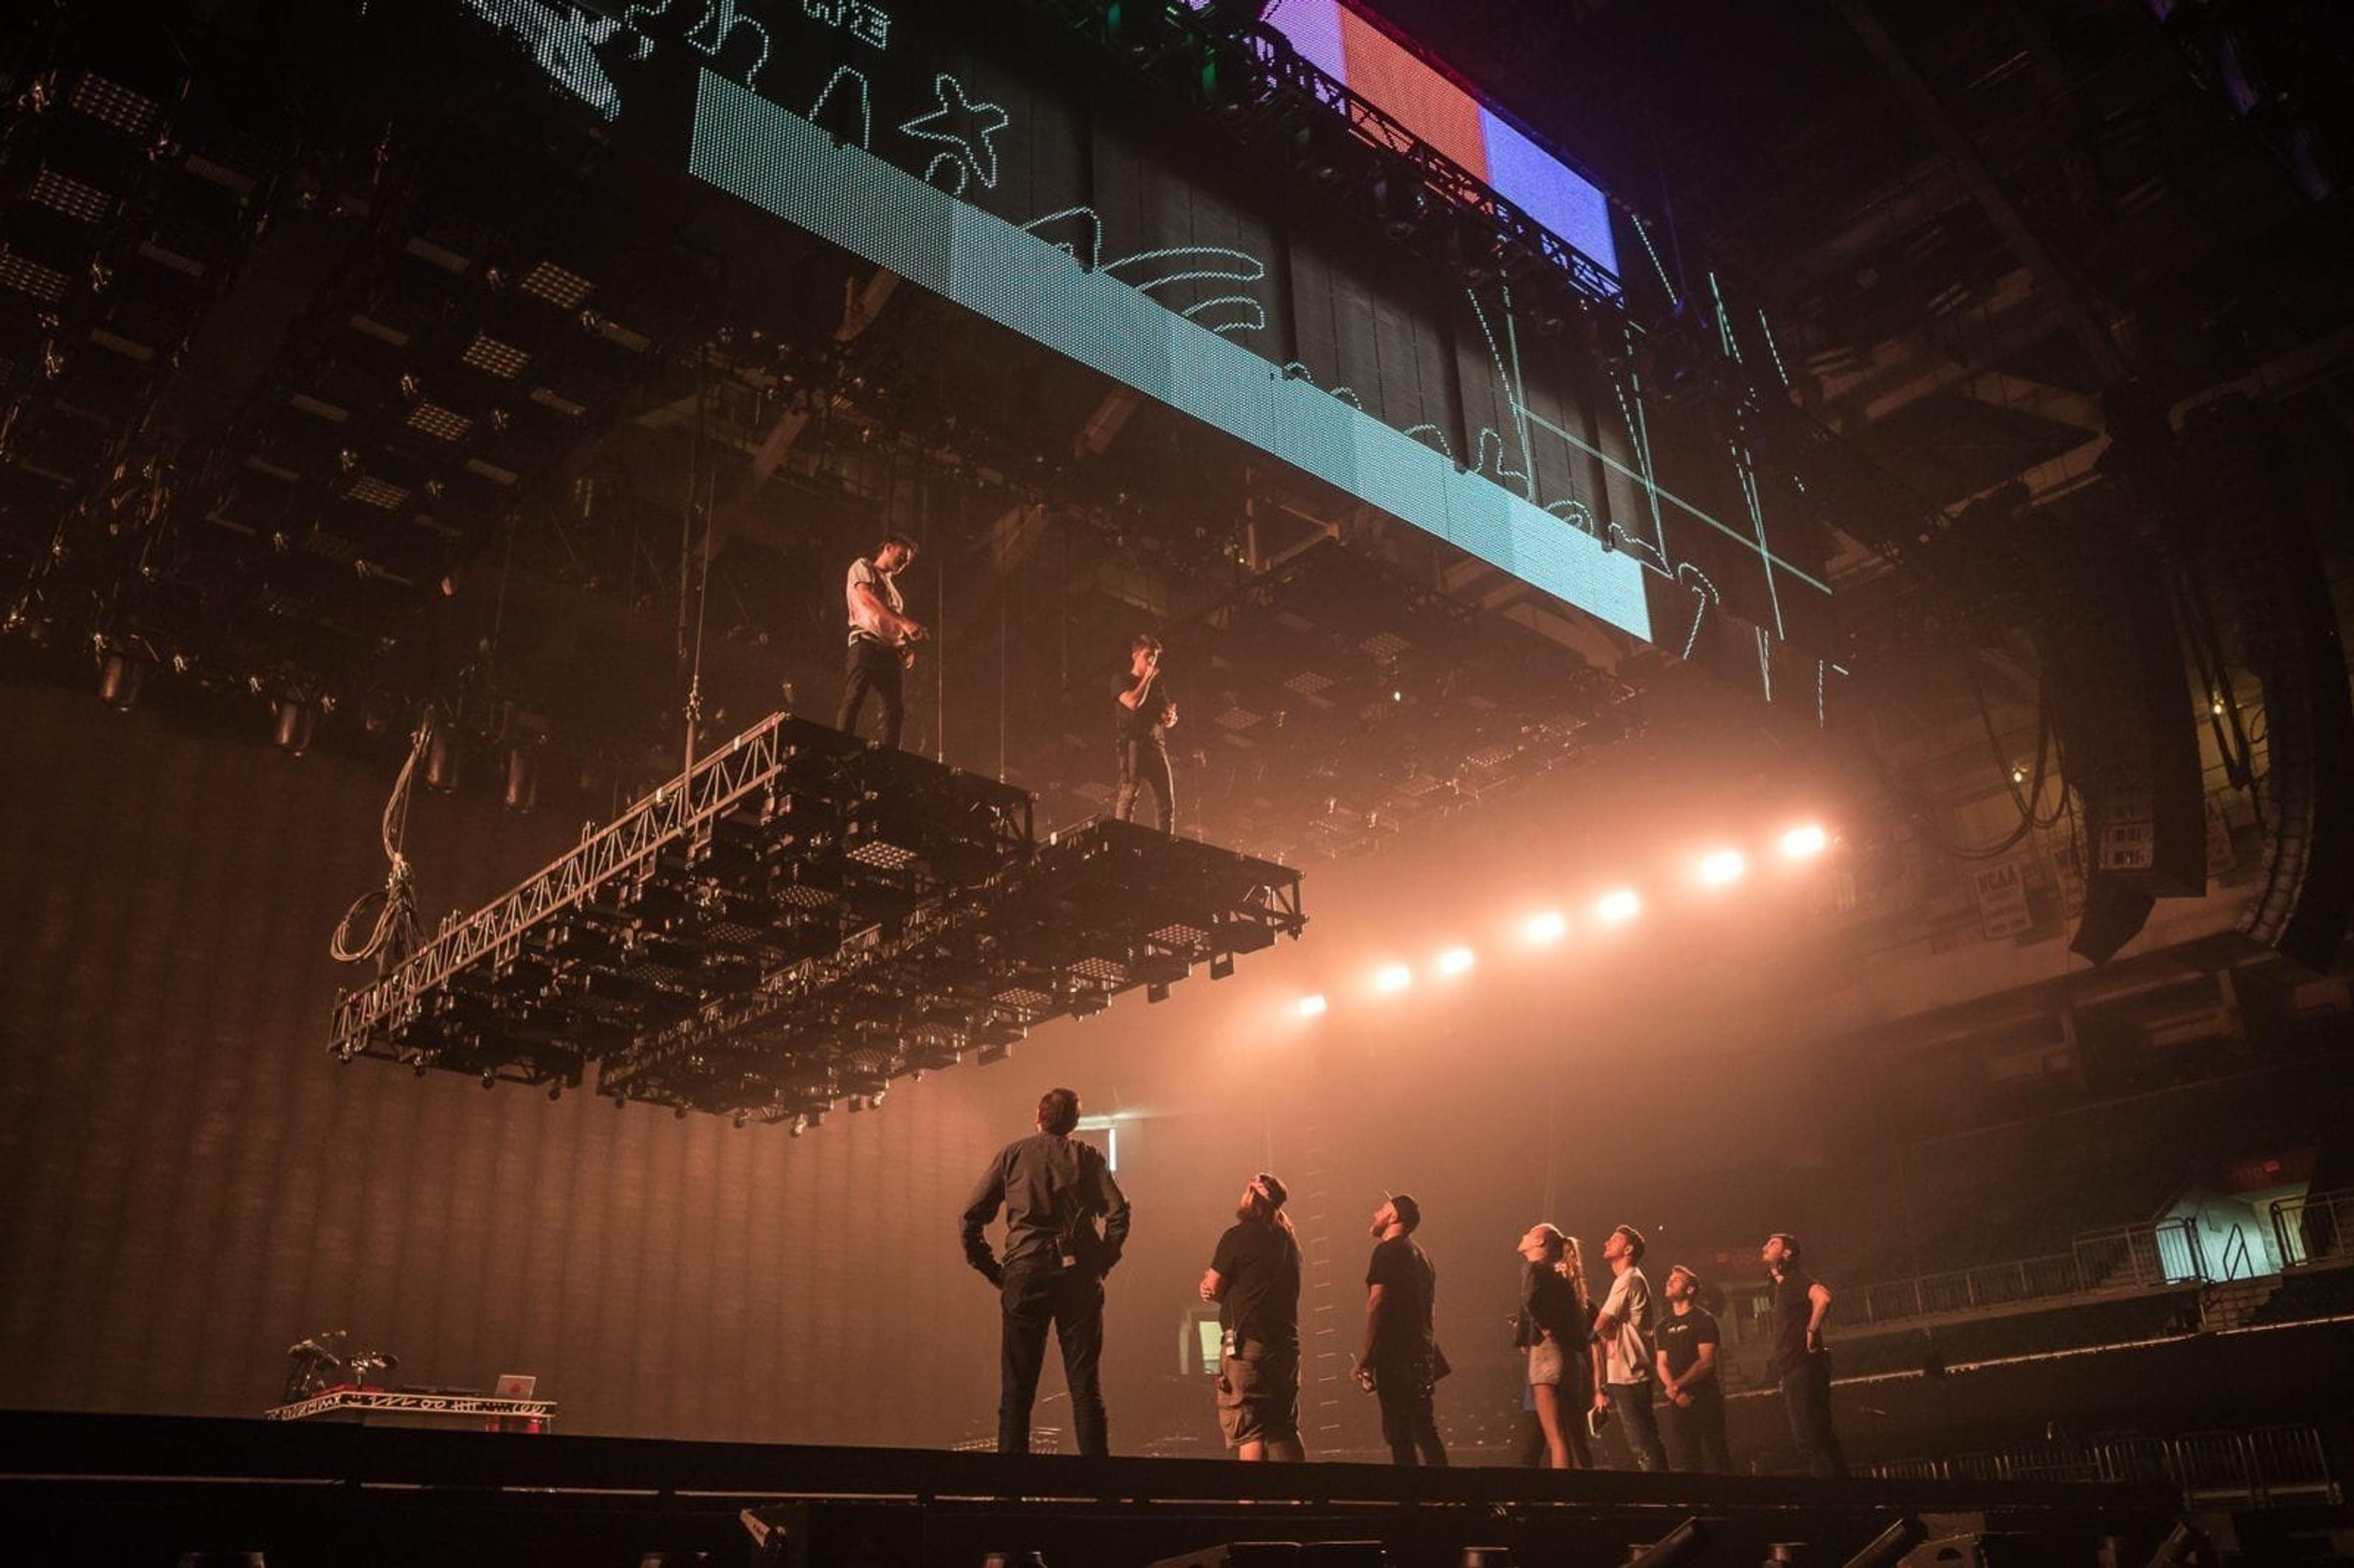 Do Not Open design and tour crews look up at Alex and Drew of The Chainsmokers as they test out risers for their upcoming concert tour.